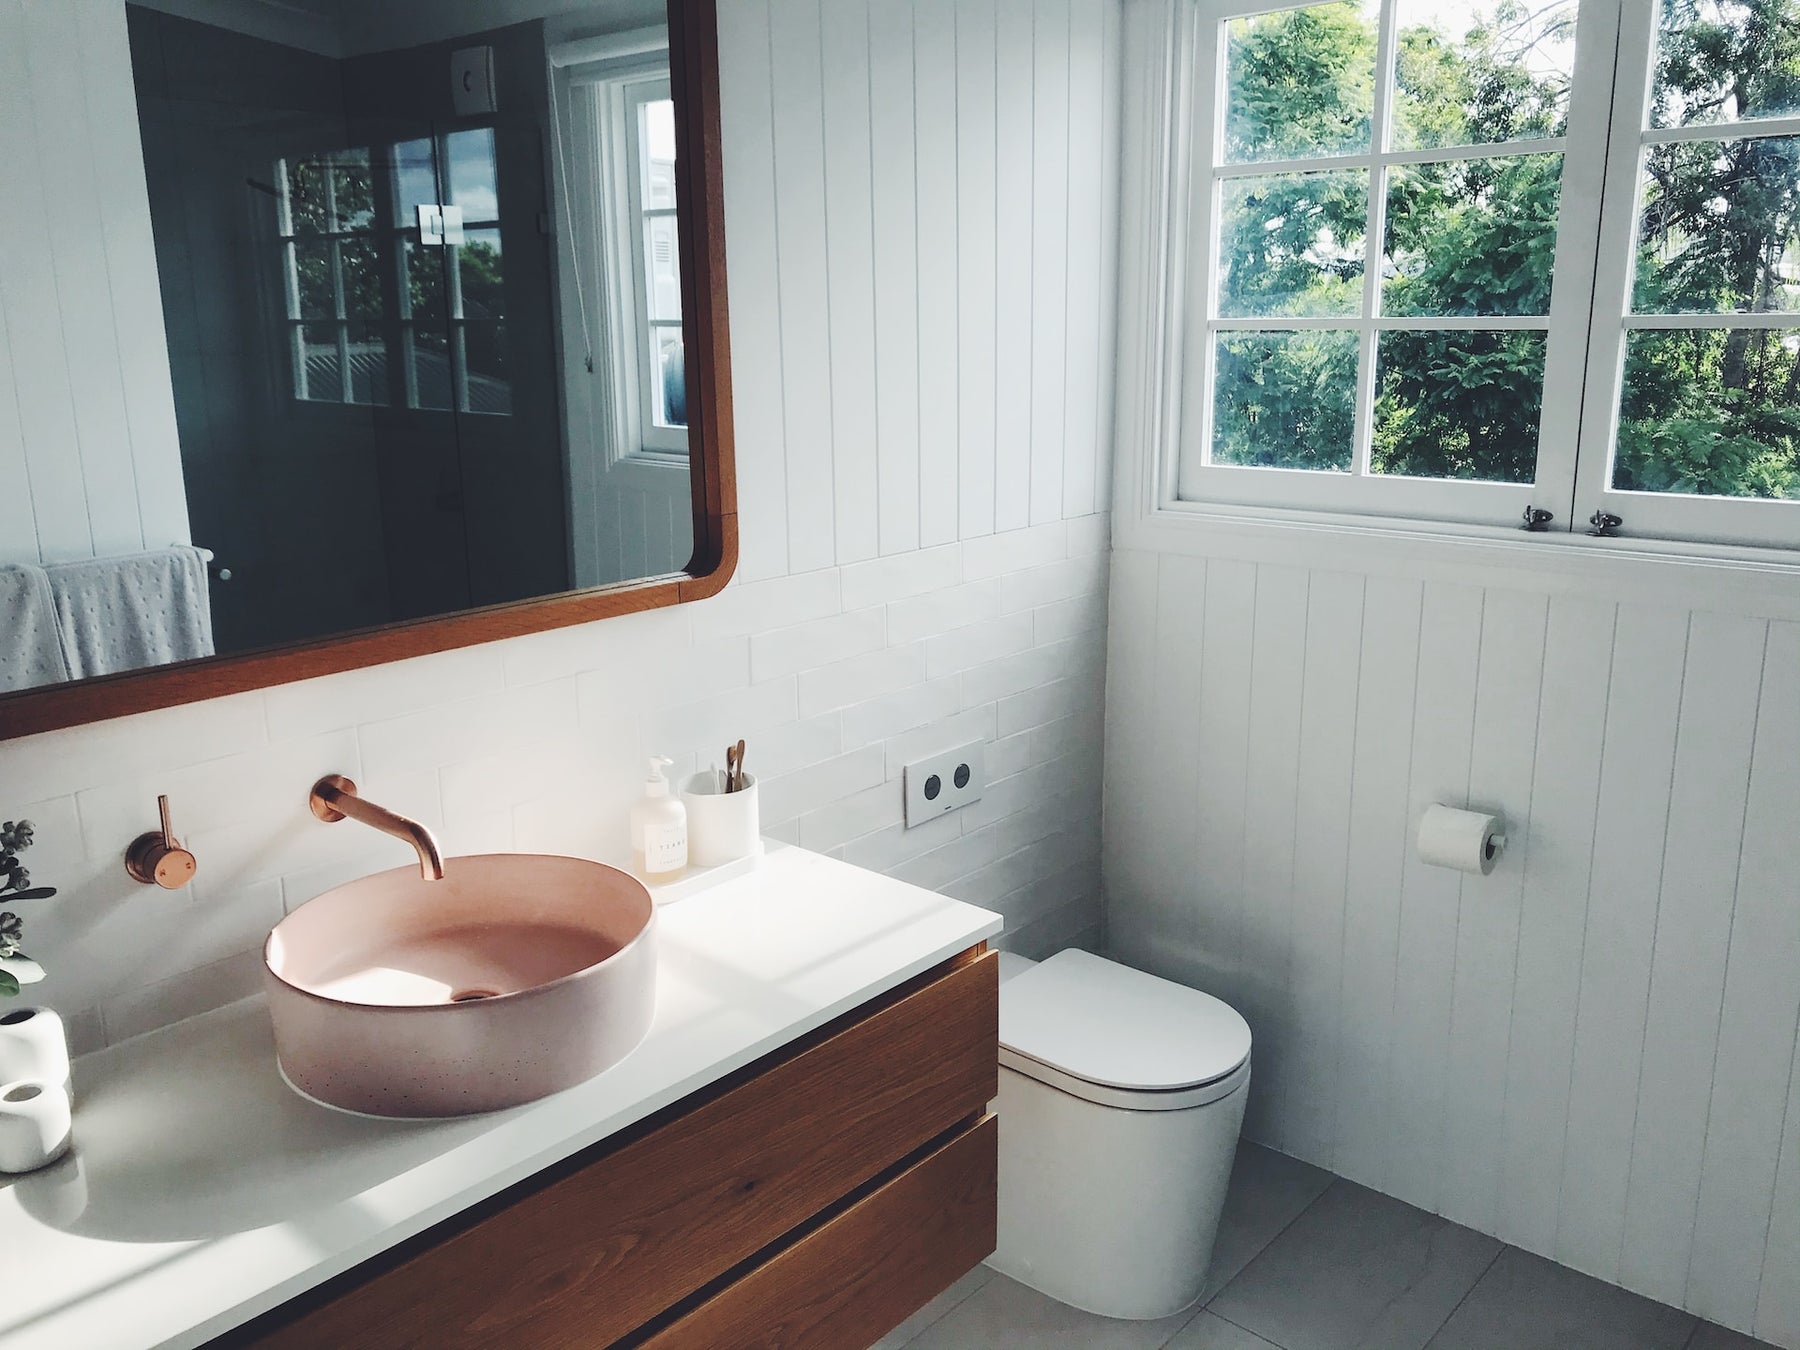 The Art of Bathroom Design: Choosing the Perfect Toilet for Your Space